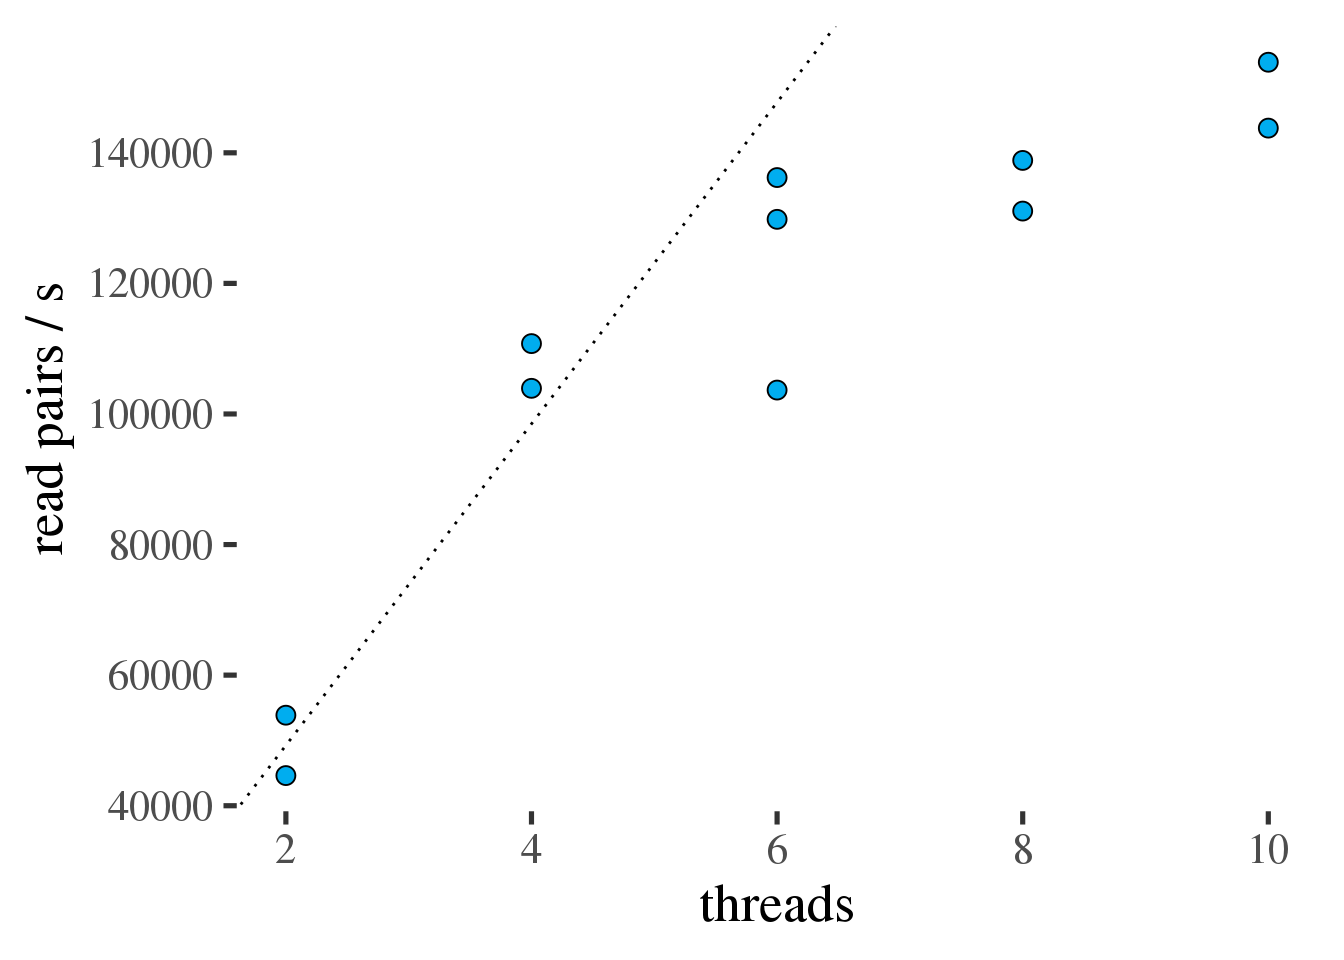 Throughput of fastp in read pairs per second as a function of the number of threads. Ideal scaling is shown as a dotted line.